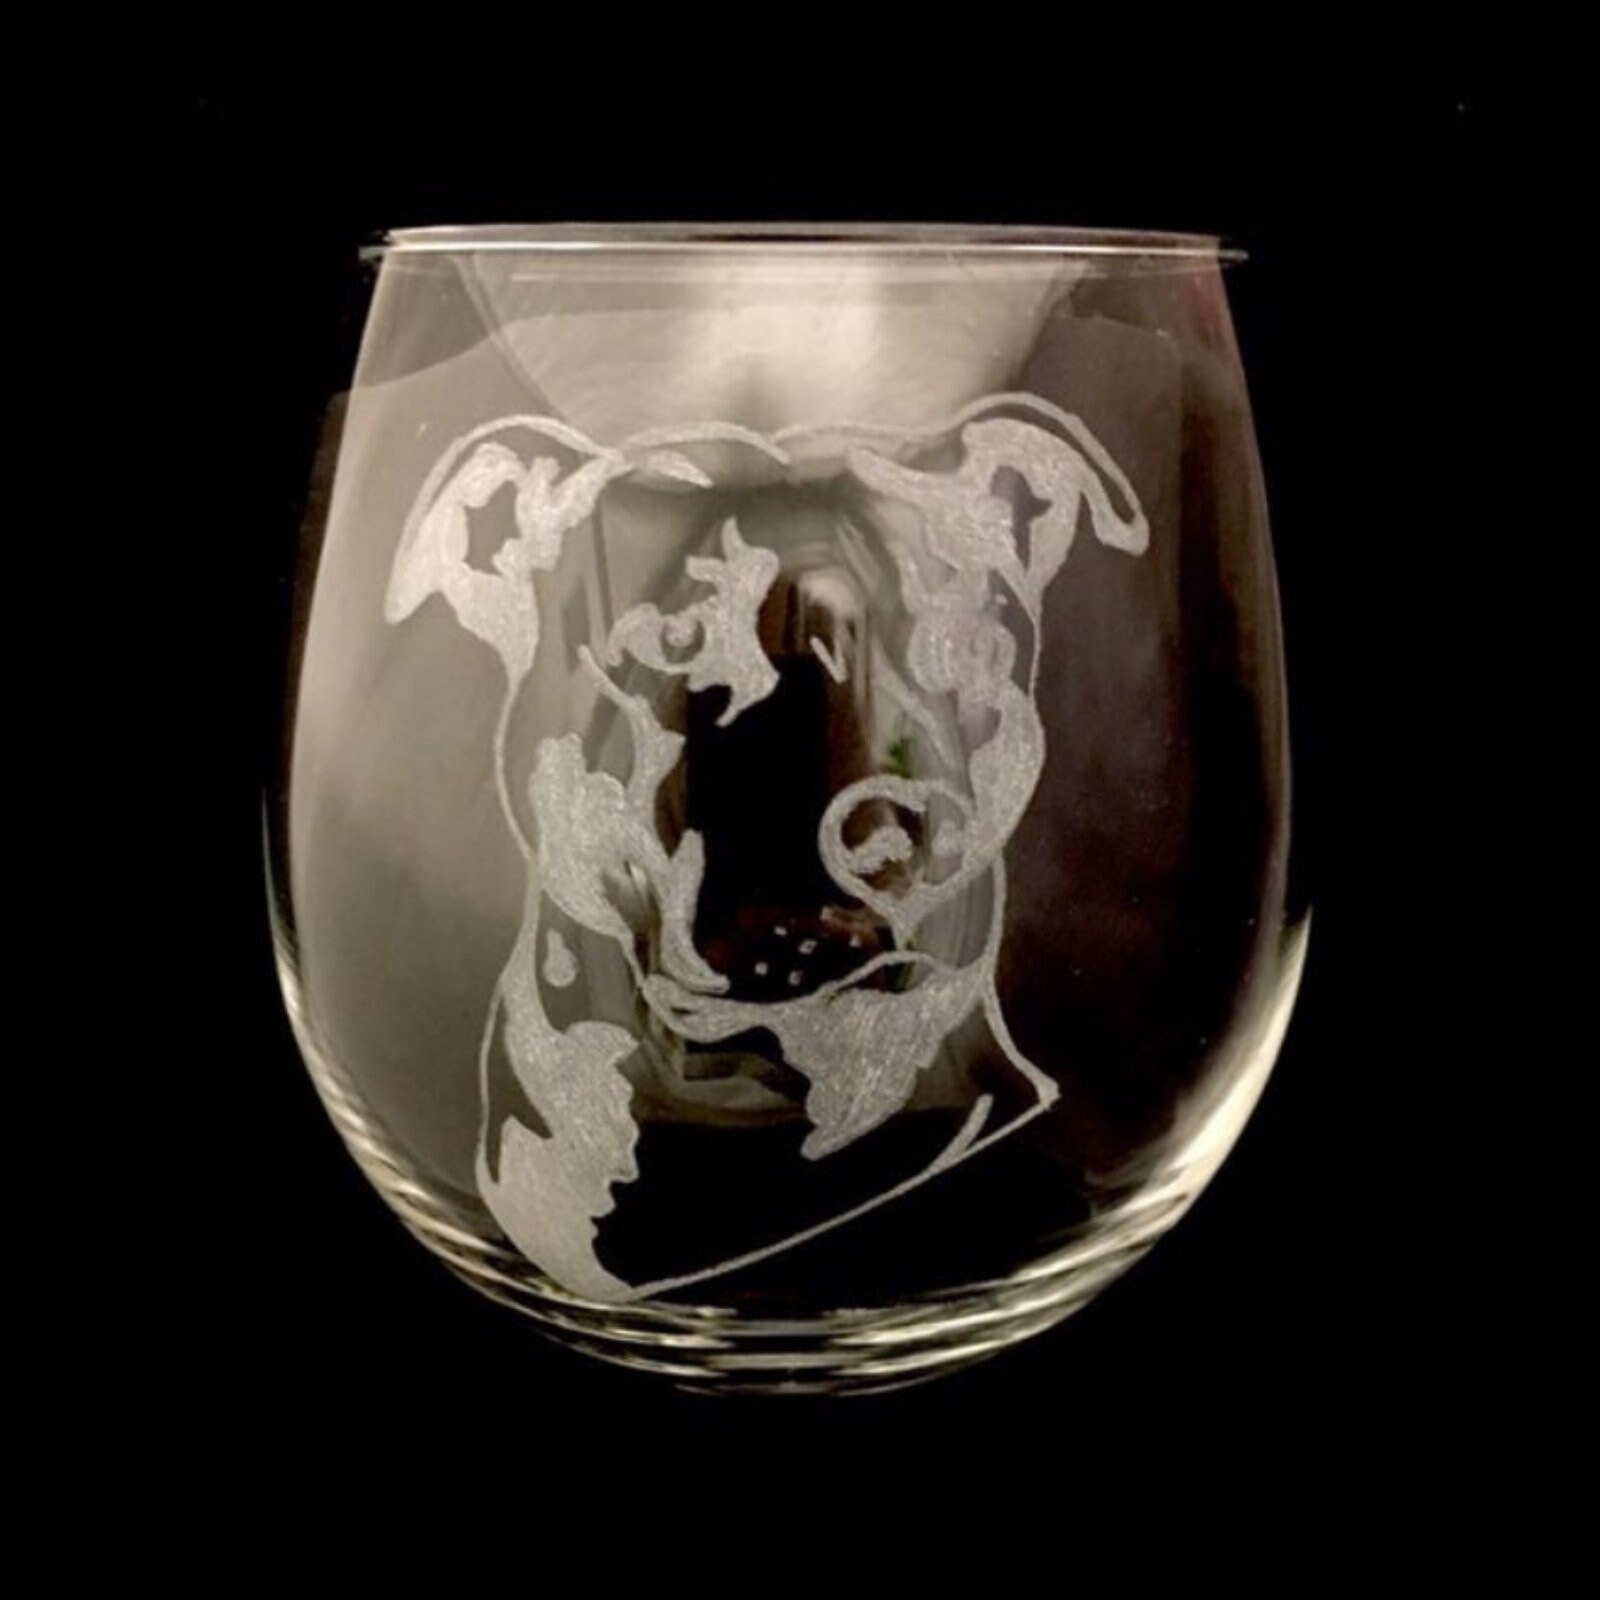 Unique Staffordshire Bull Terrier Dog s Proud to Have a Little Staffordshire Bull Terrier New Wine Glass For Friends From Friends